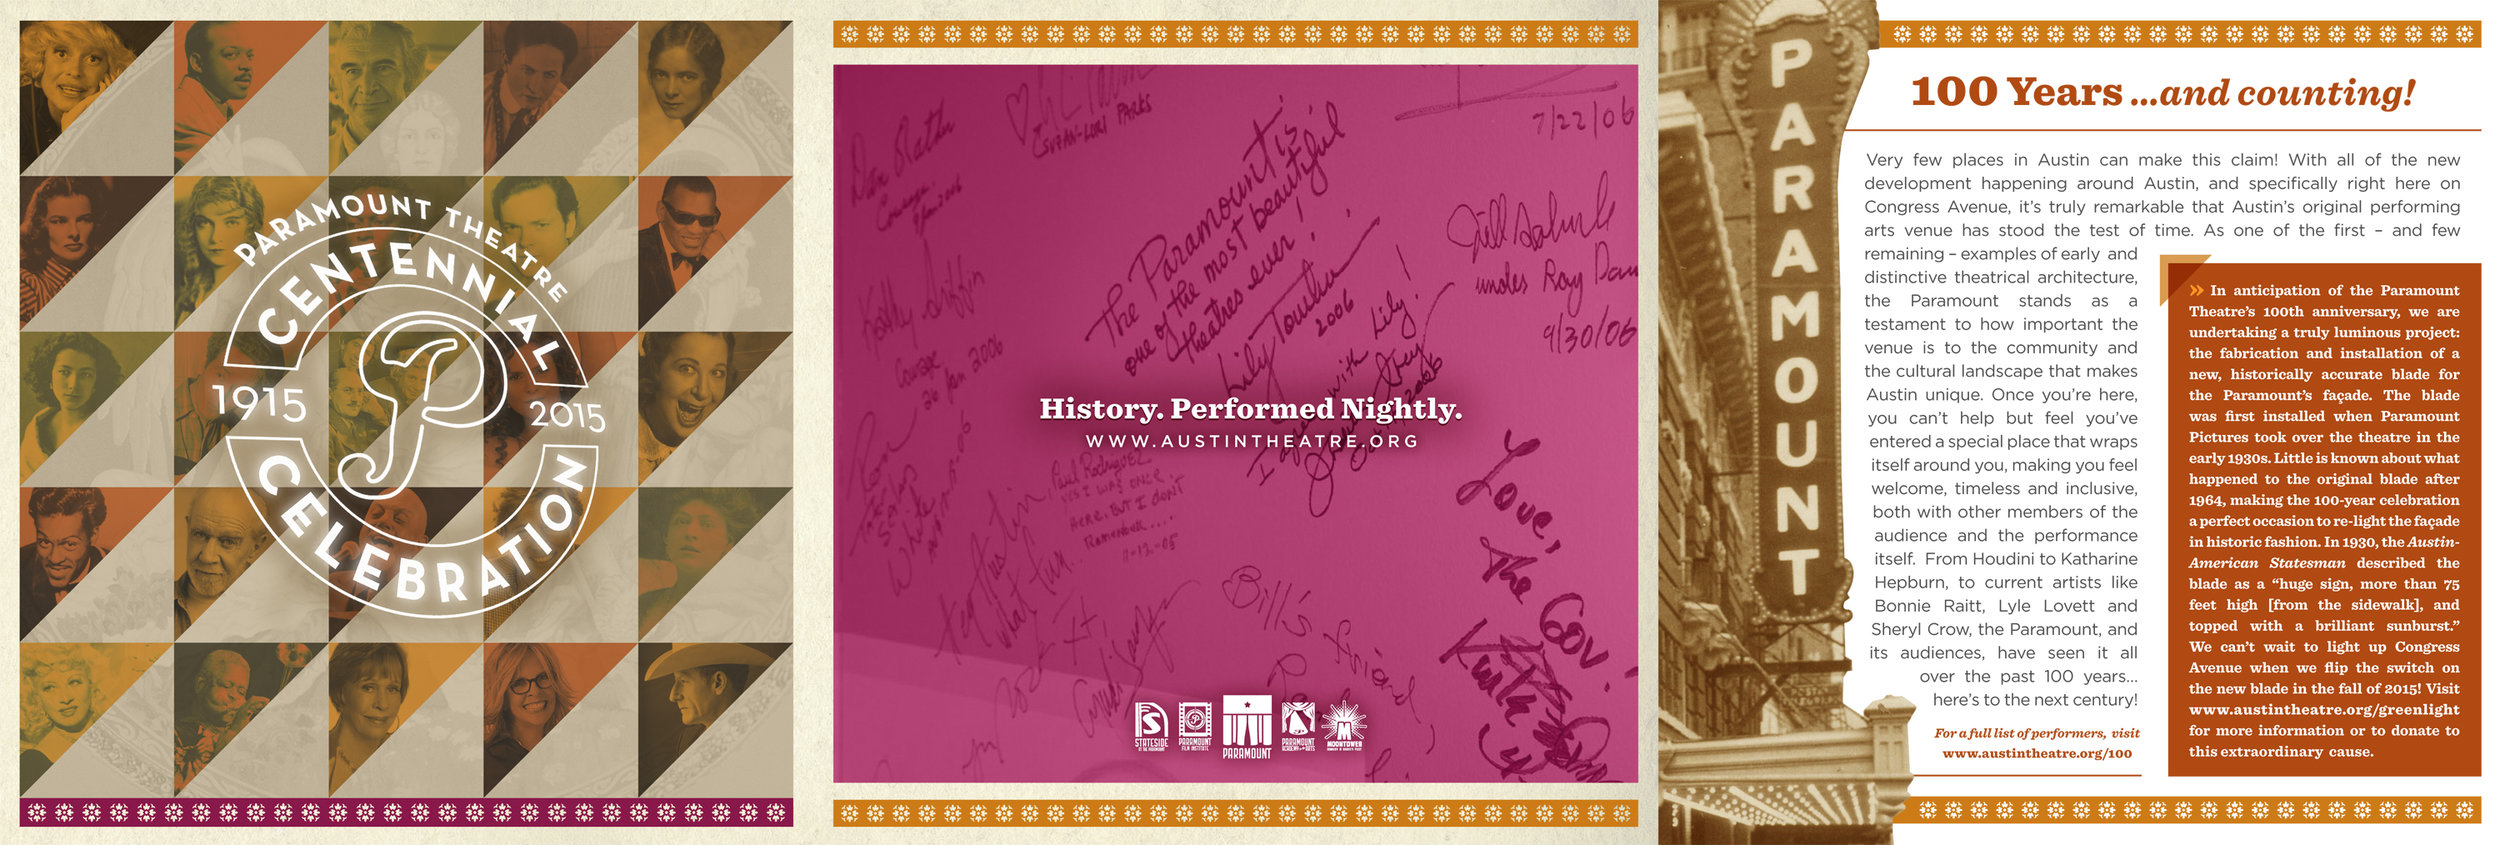  Brochure (outside) commemorating 100 years of the Paramount Theatre. 